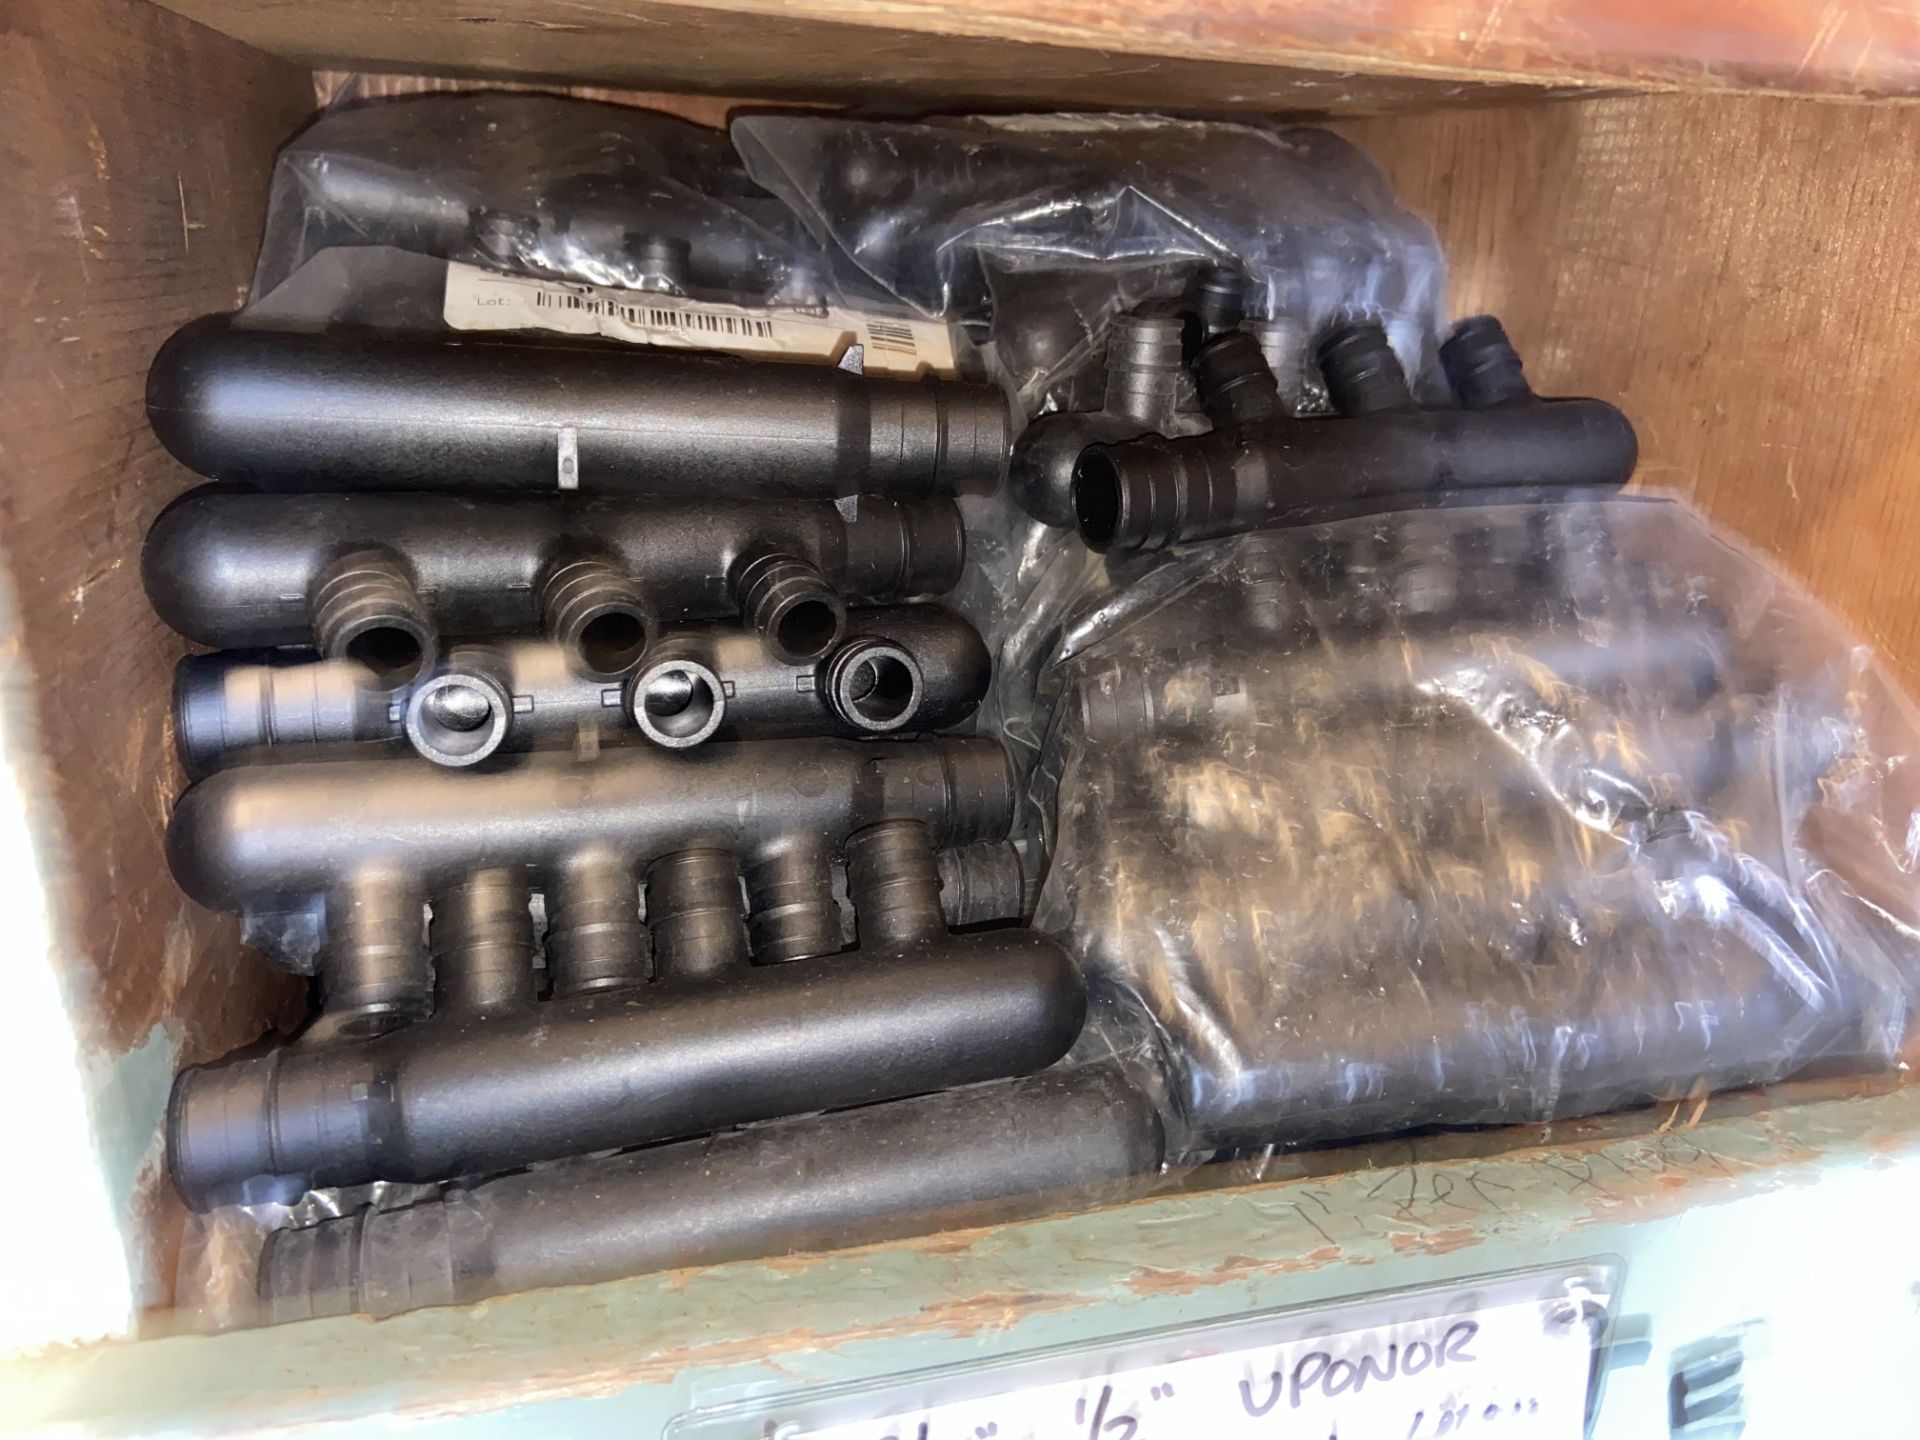 3/4”x1/2” Uponor Manifold 3 port (Bin:P25,P26) (LOCATED IN MONROEVILLE, PA)